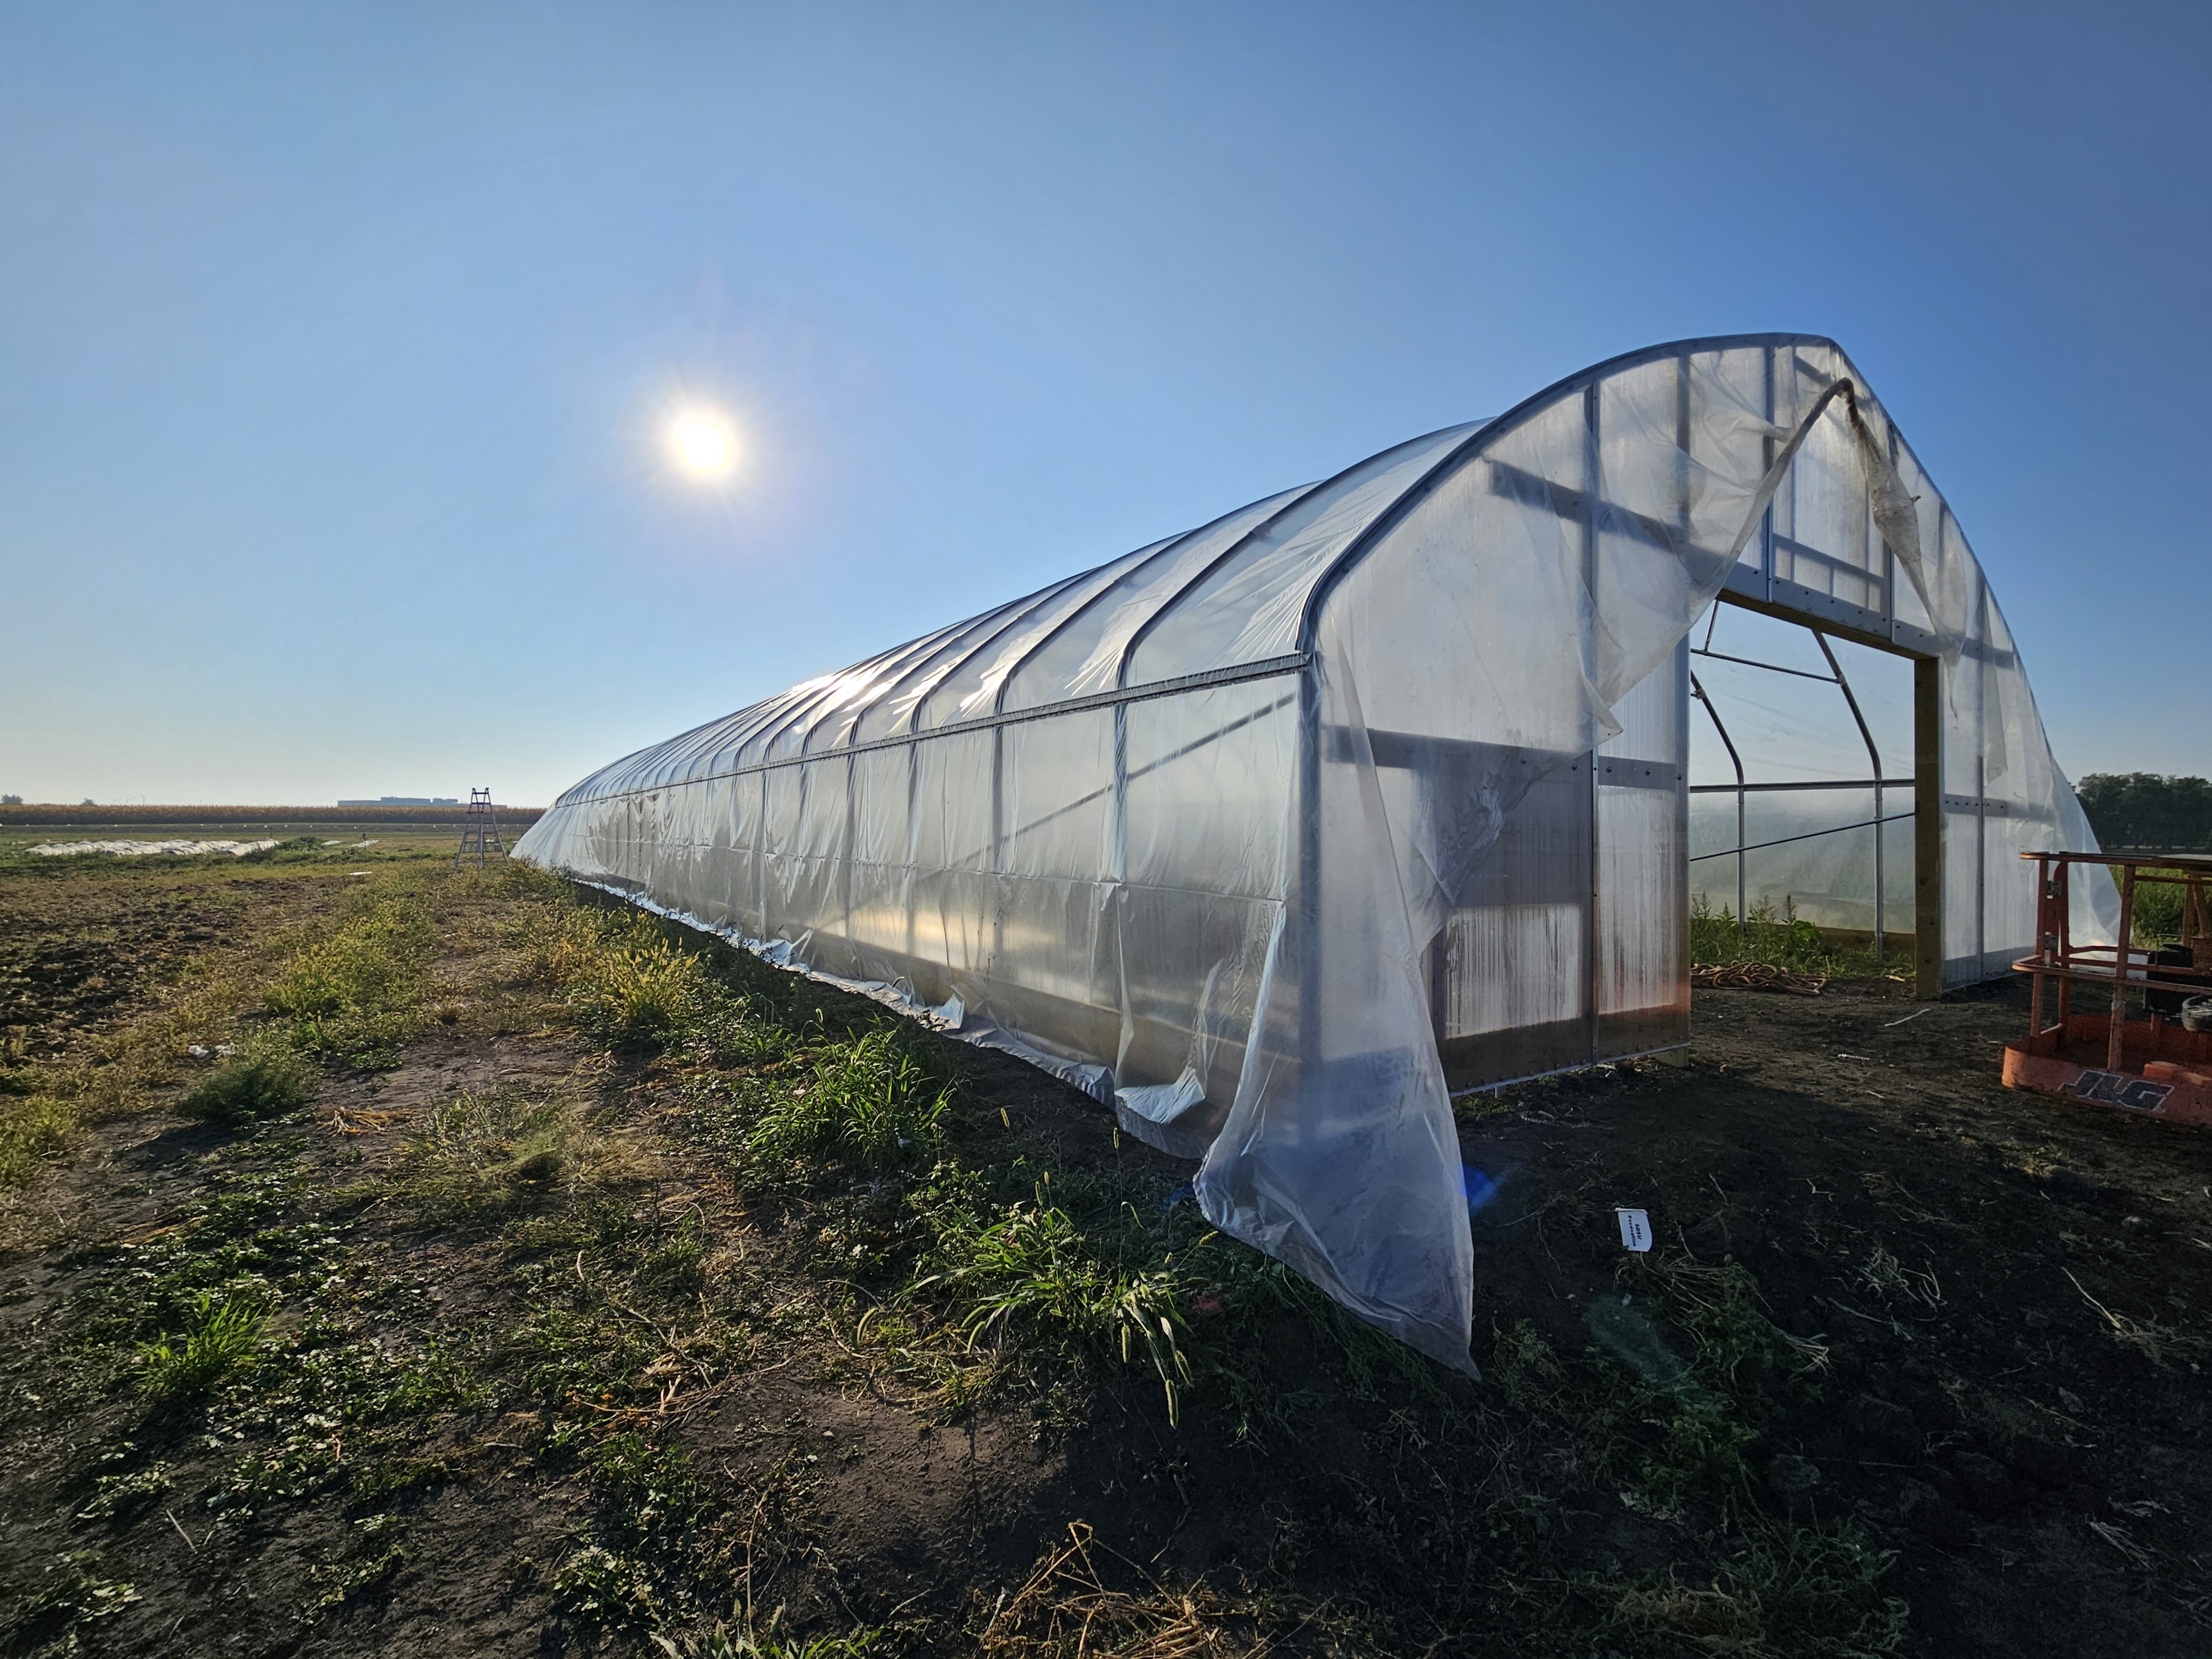 A metal high tunnel enclosed in plastic is in a field